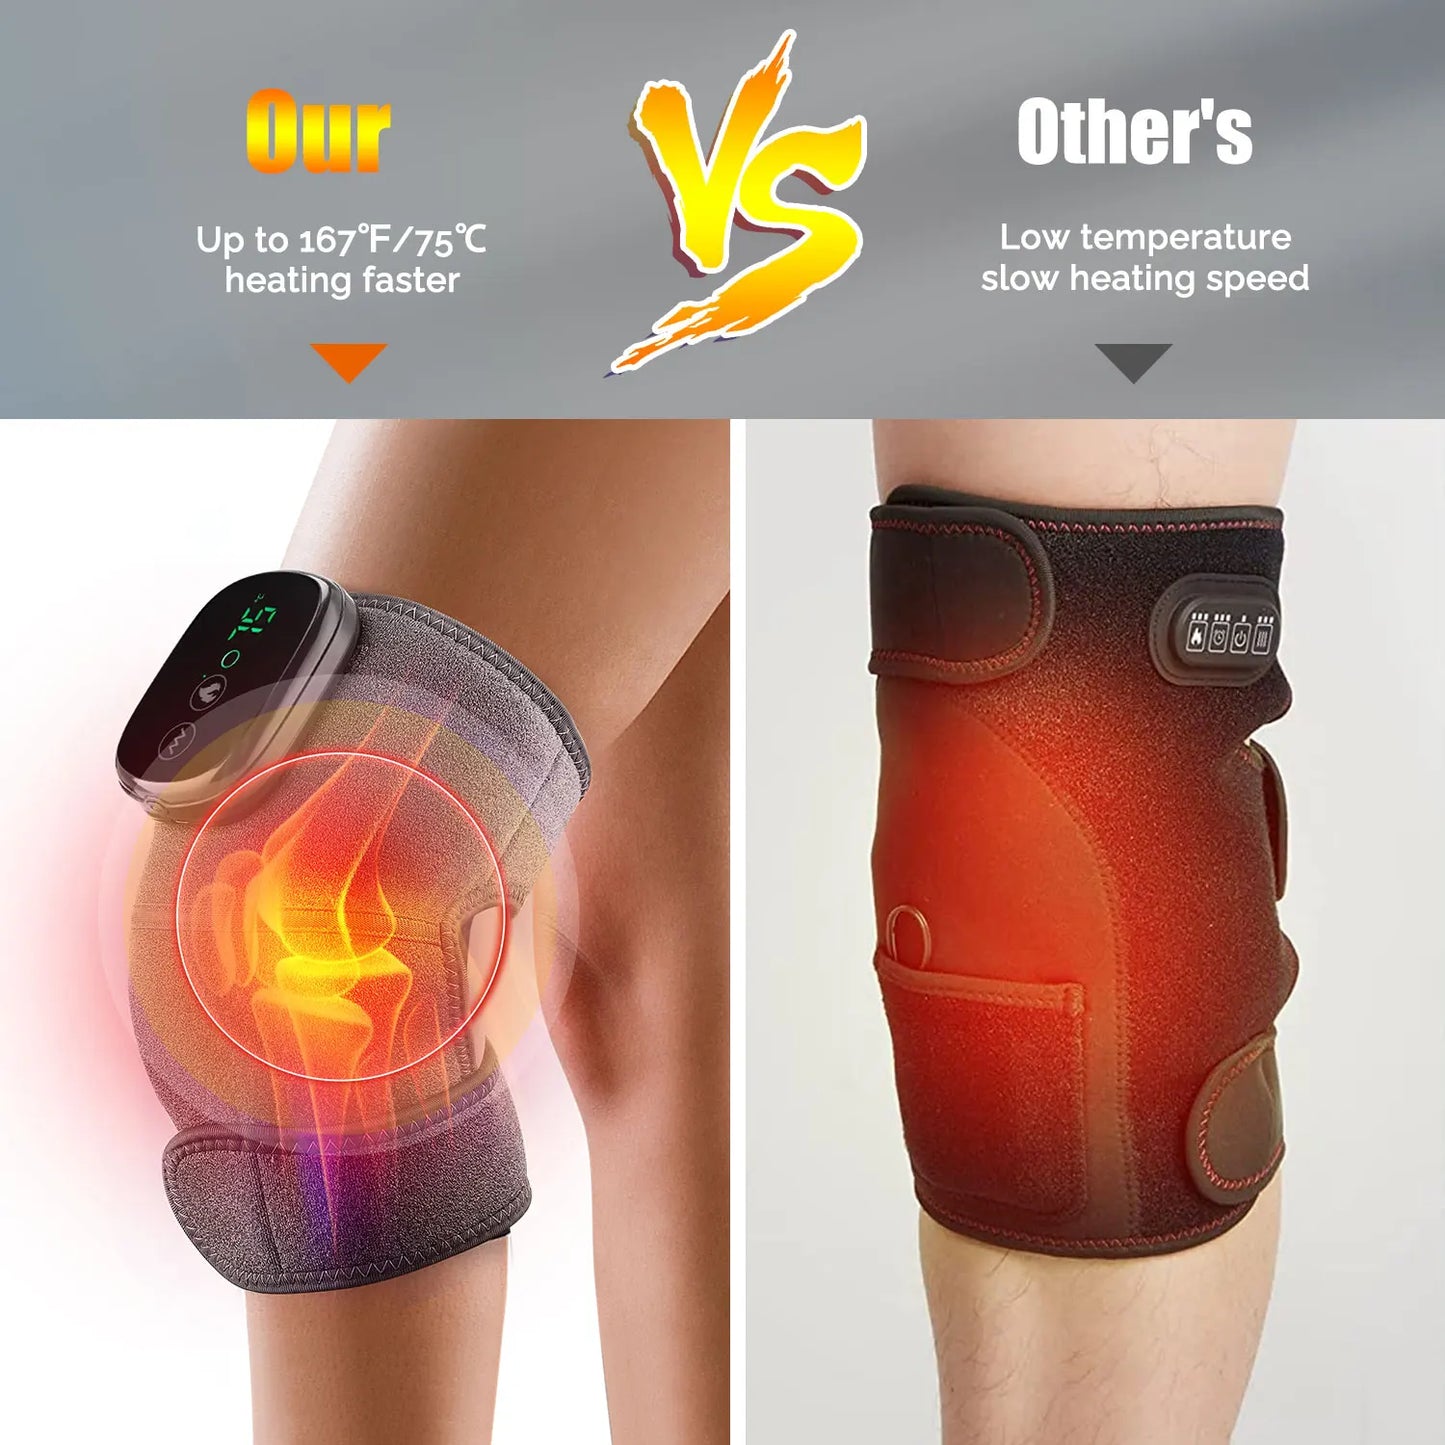 Thermal Knee Massager 3 in 1